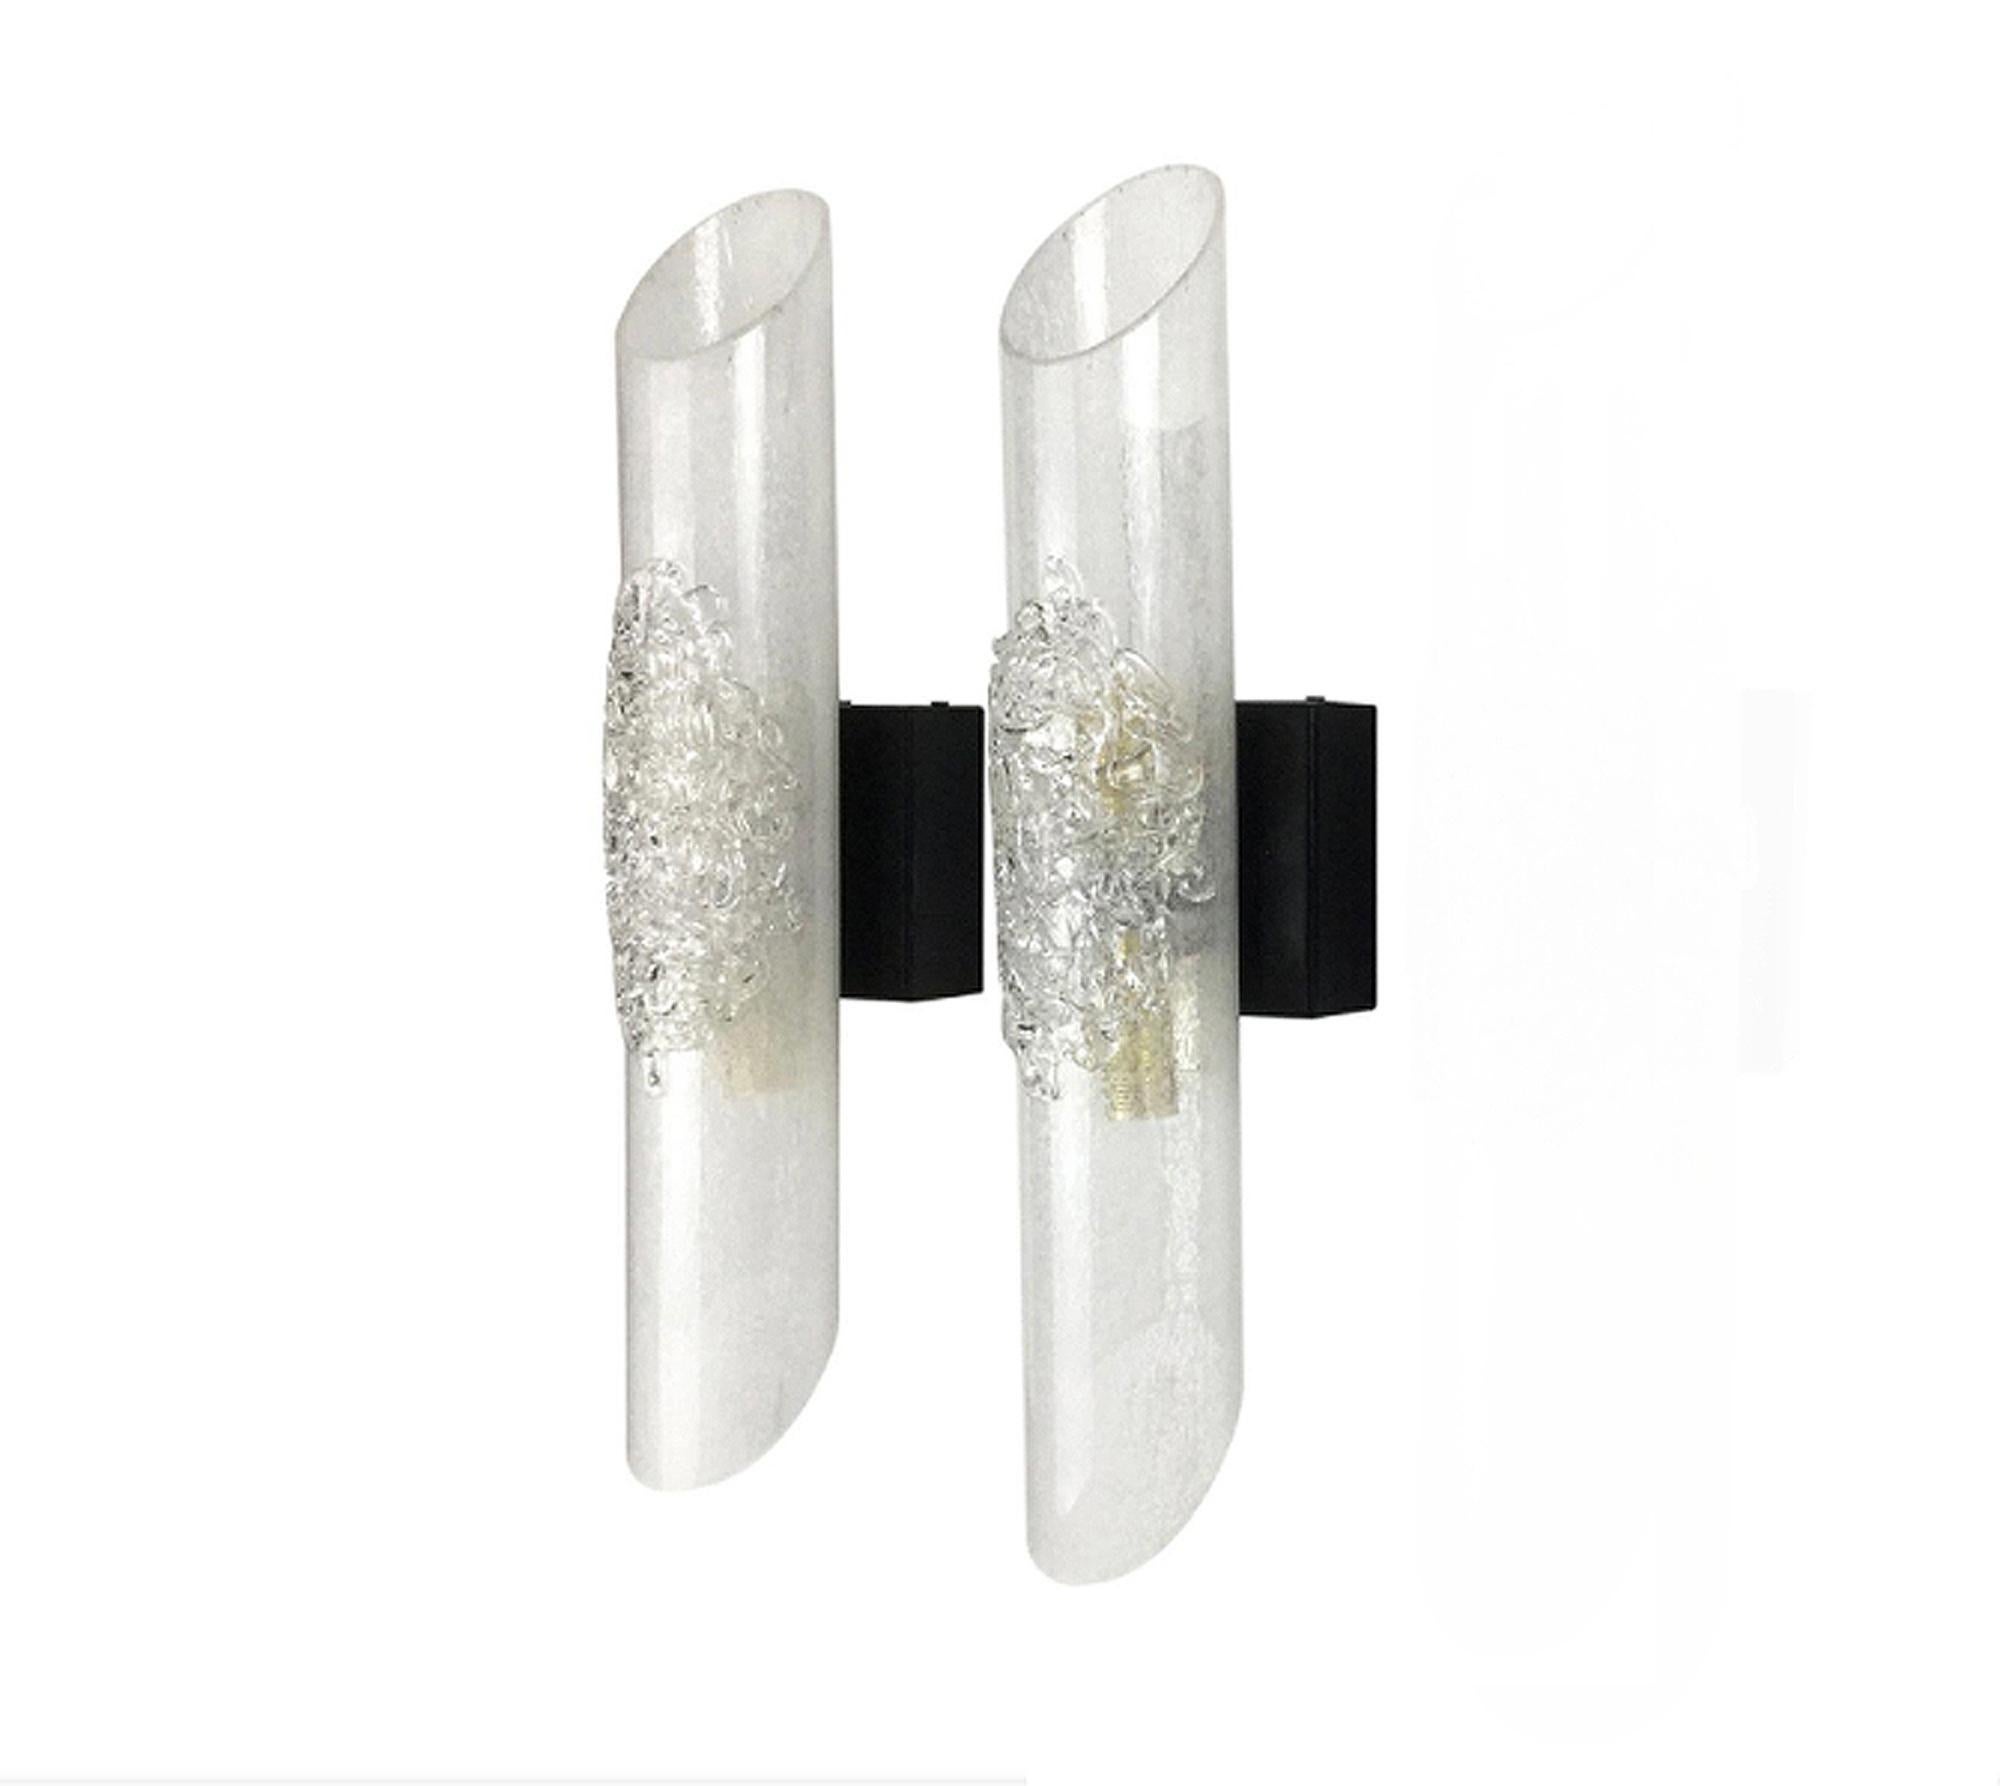 Stunning large frosted blown glass wall lights, Sconces by 